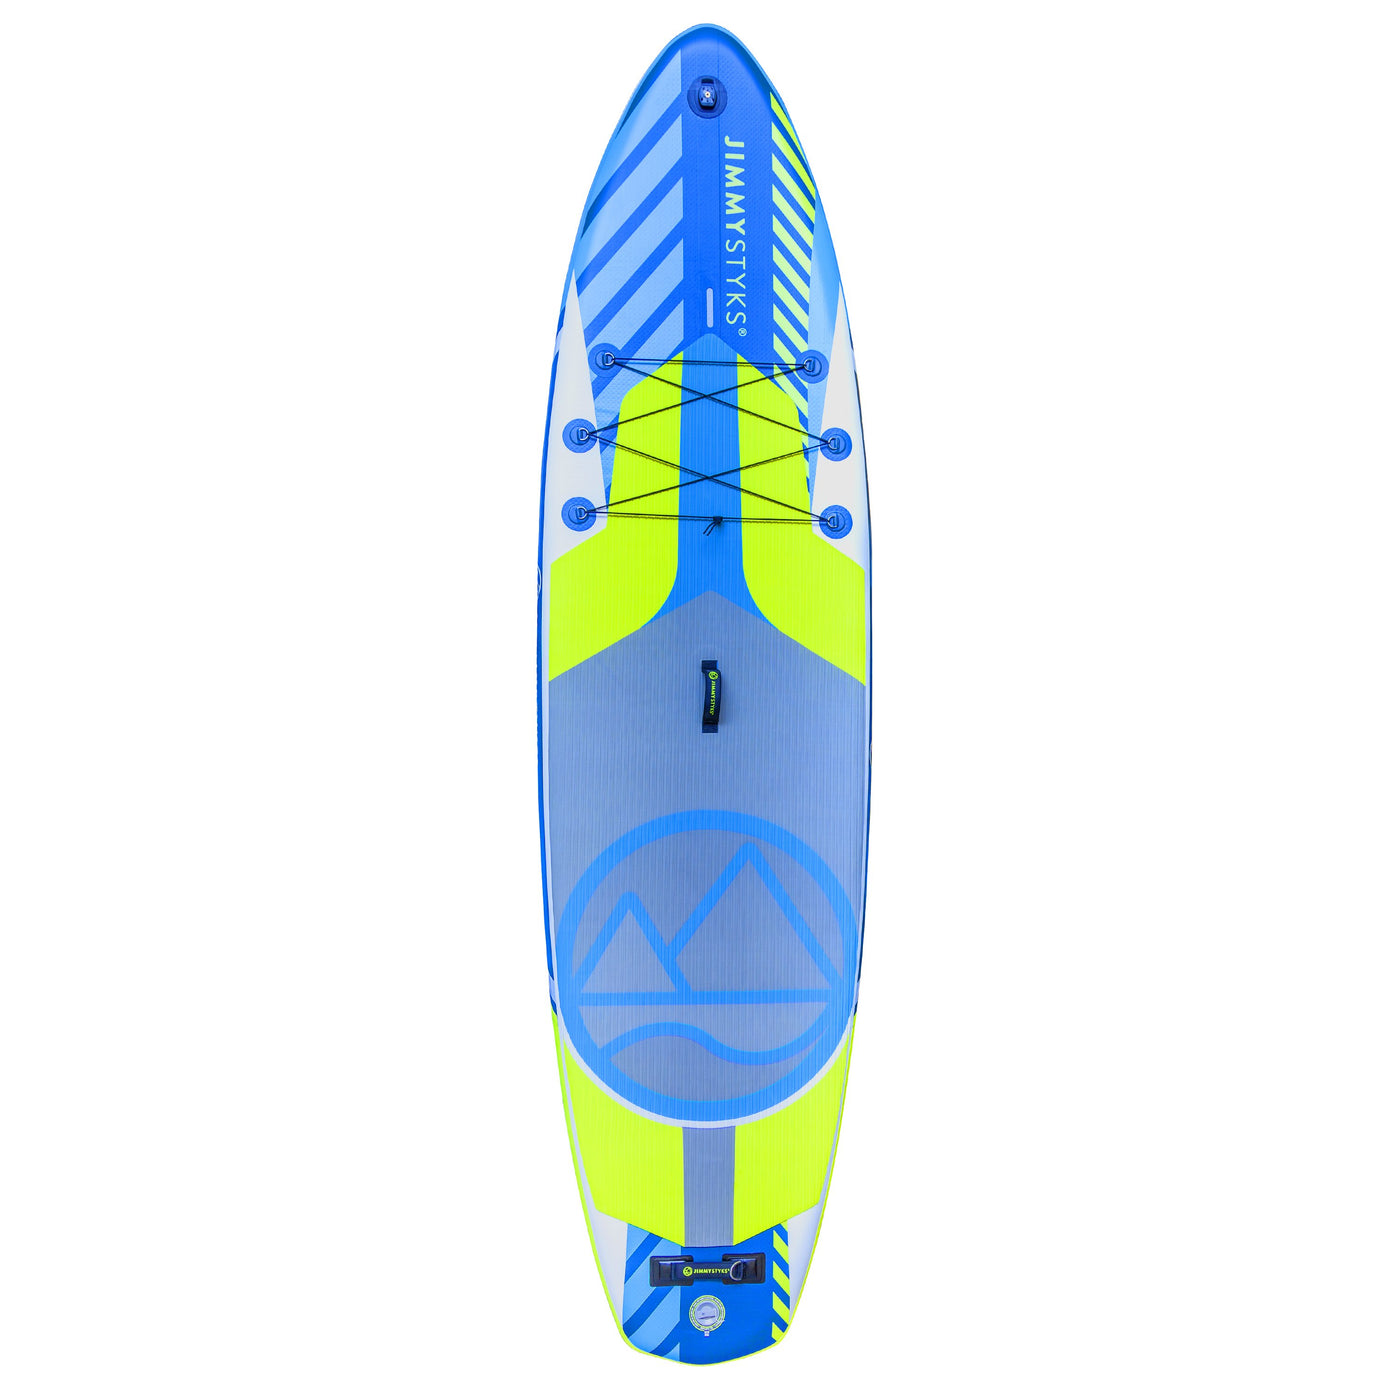 Front view of the Jimmy Styks 11' Puffer Inflatable SUP board.